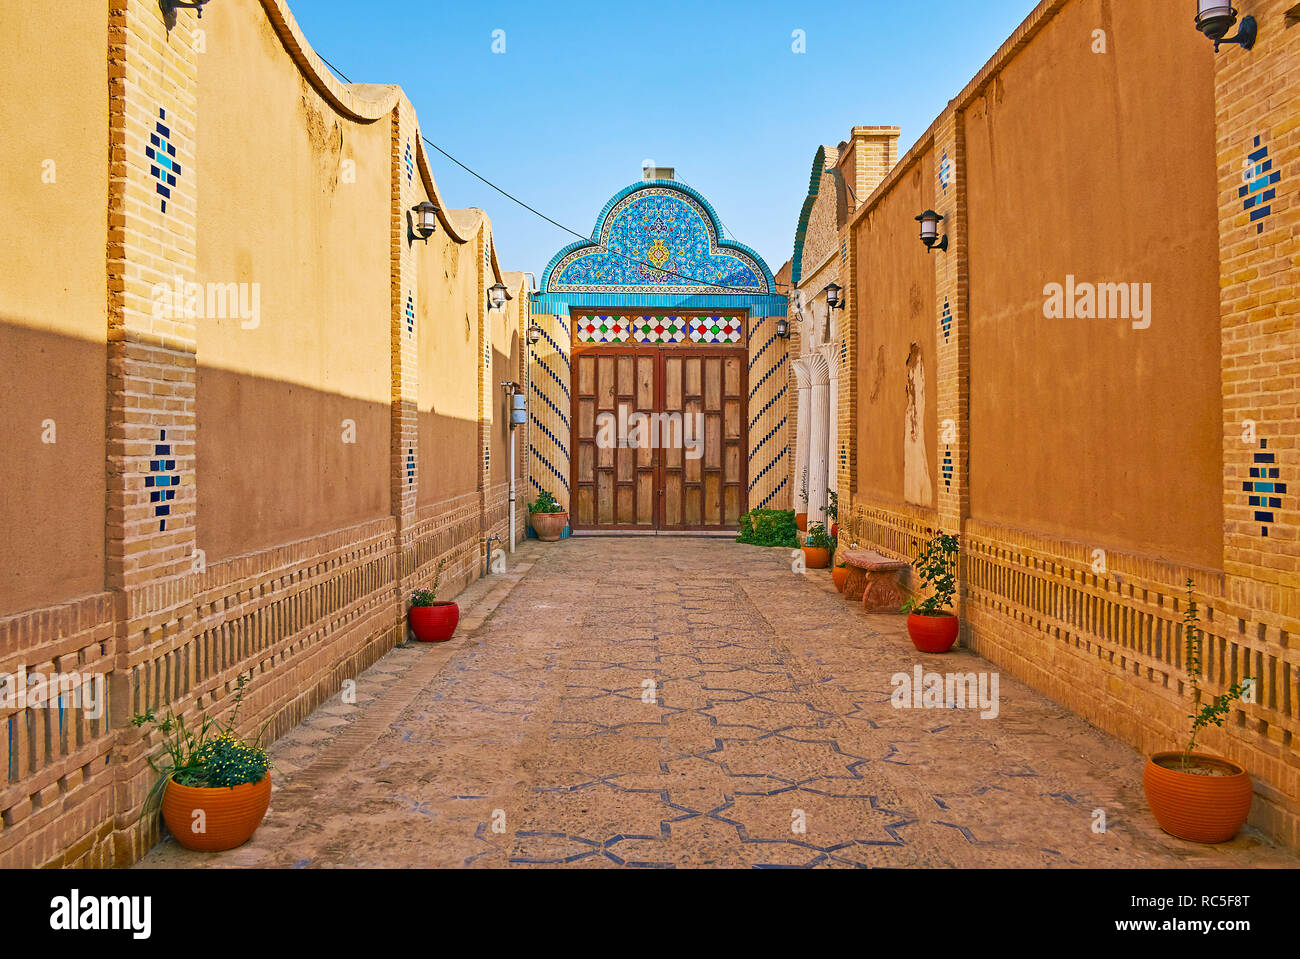 YAZD, IRAN, OCTOBER 18, 2017: The medieval edifice of Yazd Bar Association boasts traditional narrow courtyard, decorated with tiled patterns, on Octo Stock Photo